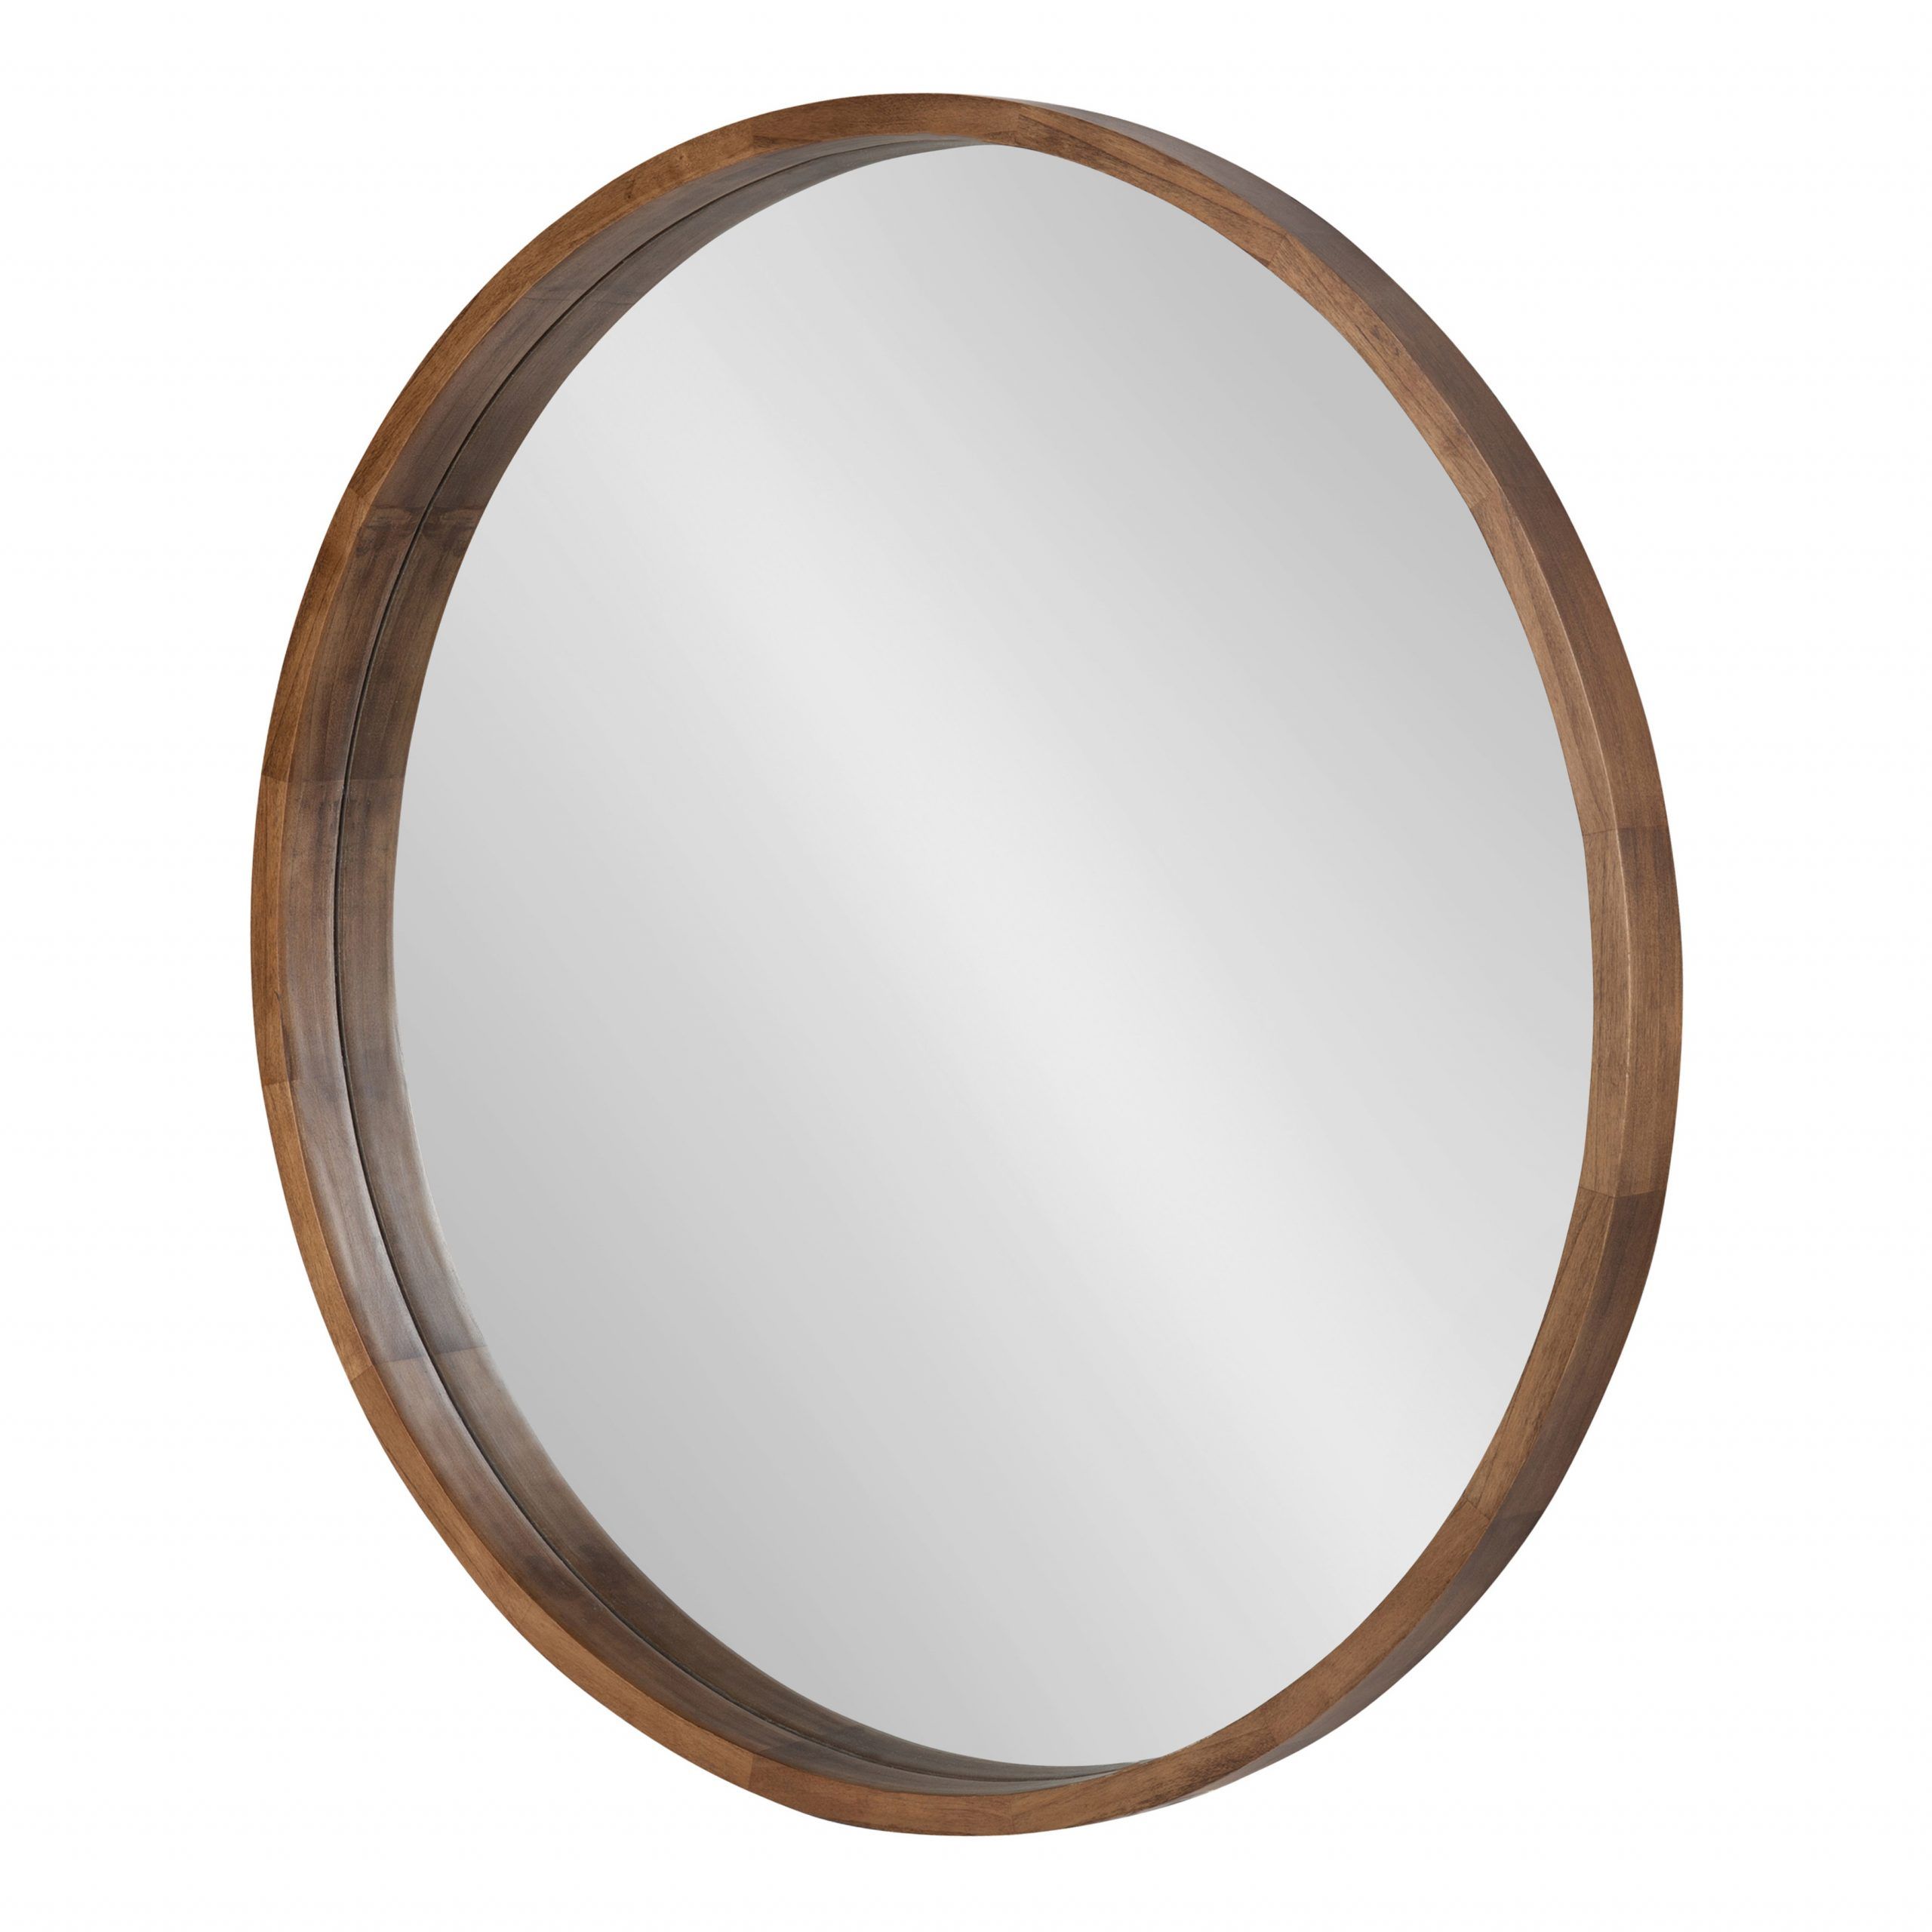 Kate And Laurel Hutton Round Wood Framed Wall Mirror, 36" Diameter Intended For 2020 Mocha Brown Wall Mirrors (View 5 of 15)